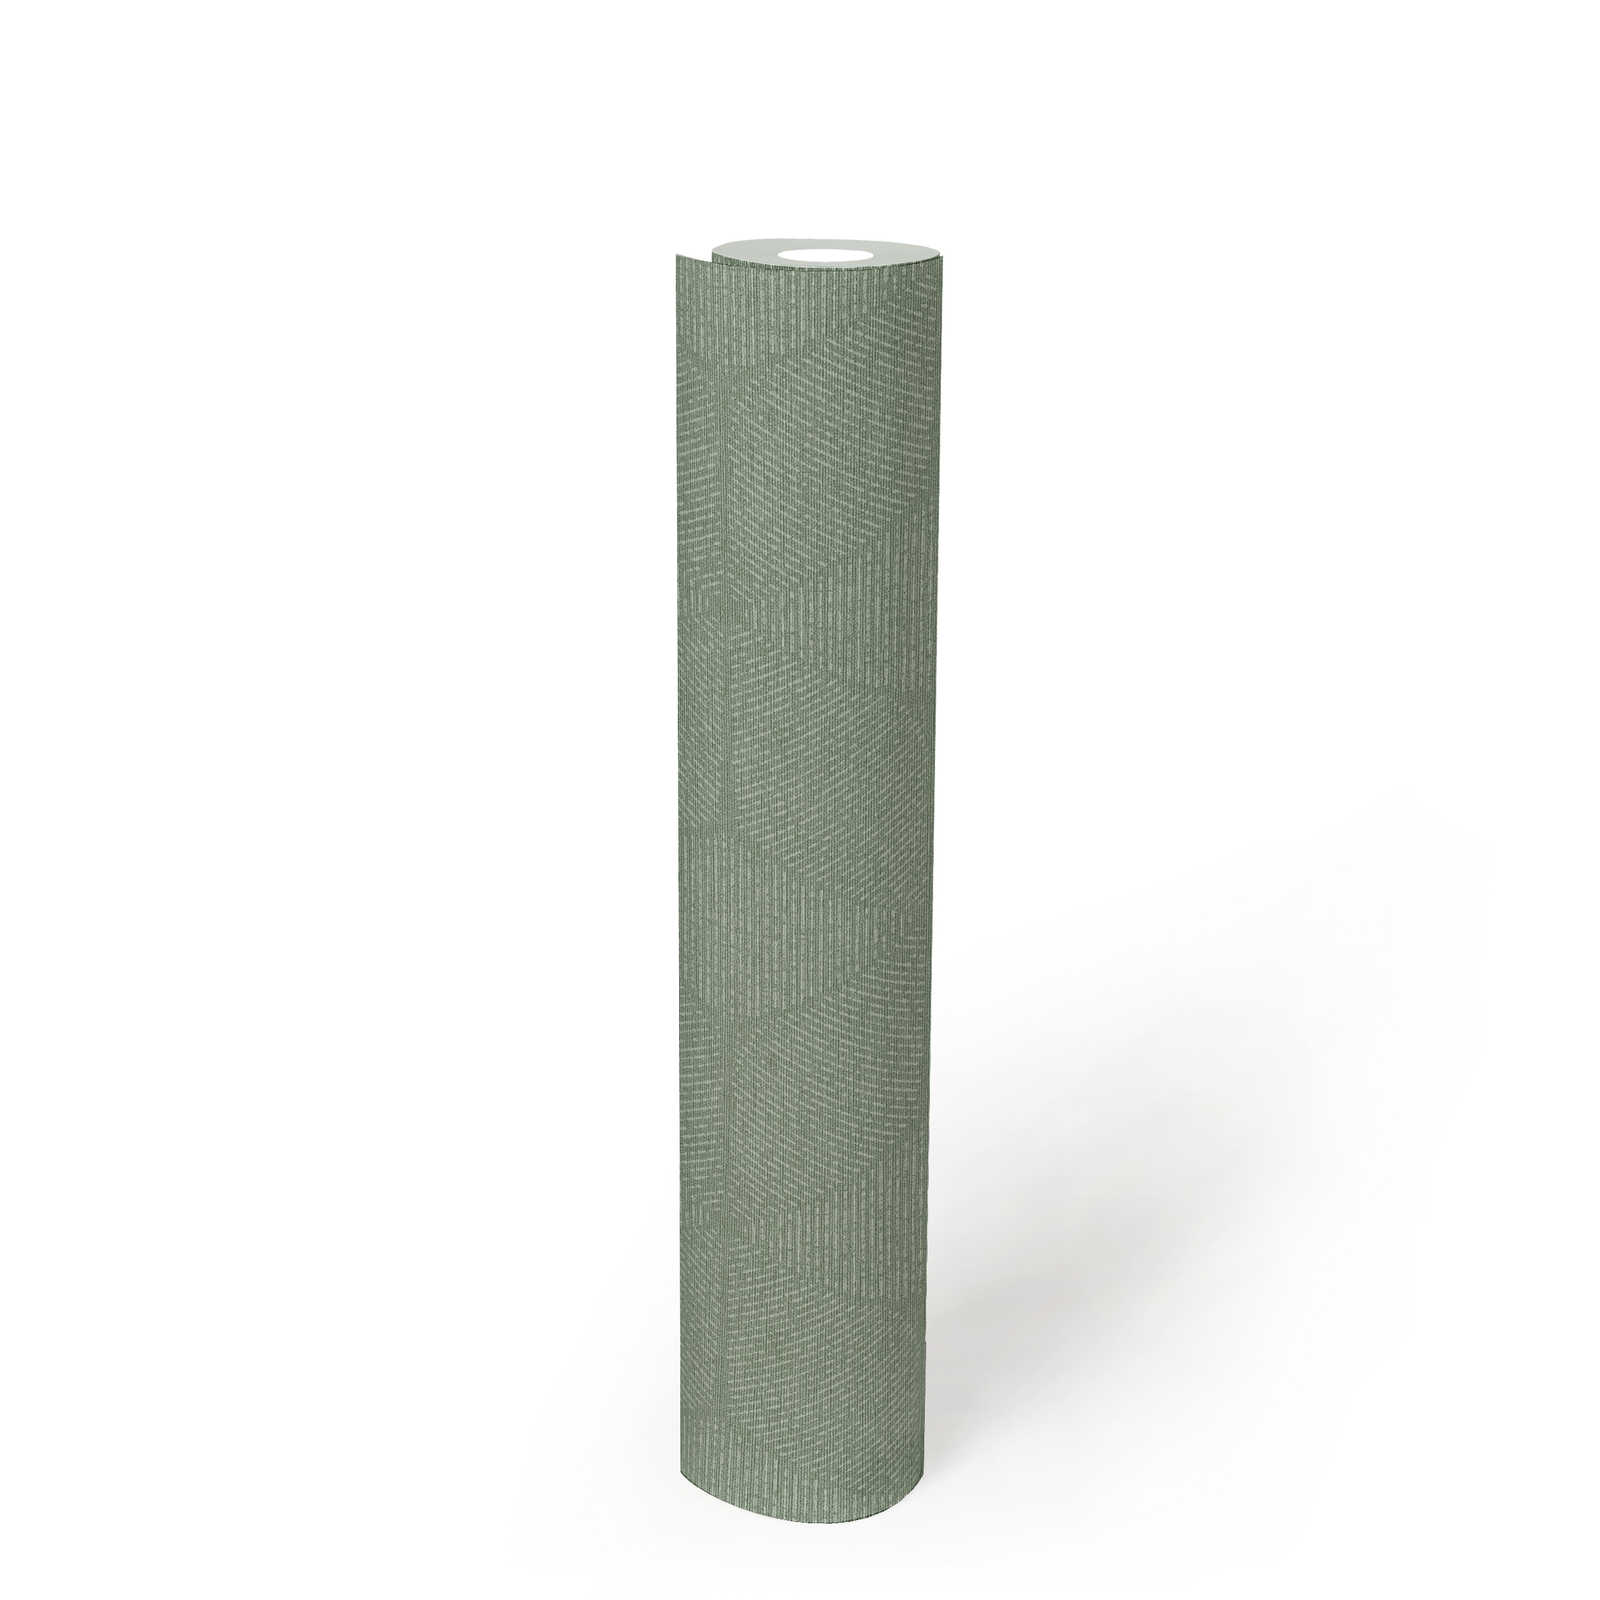             Non-woven wallpaper in floral pattern - green, white
        